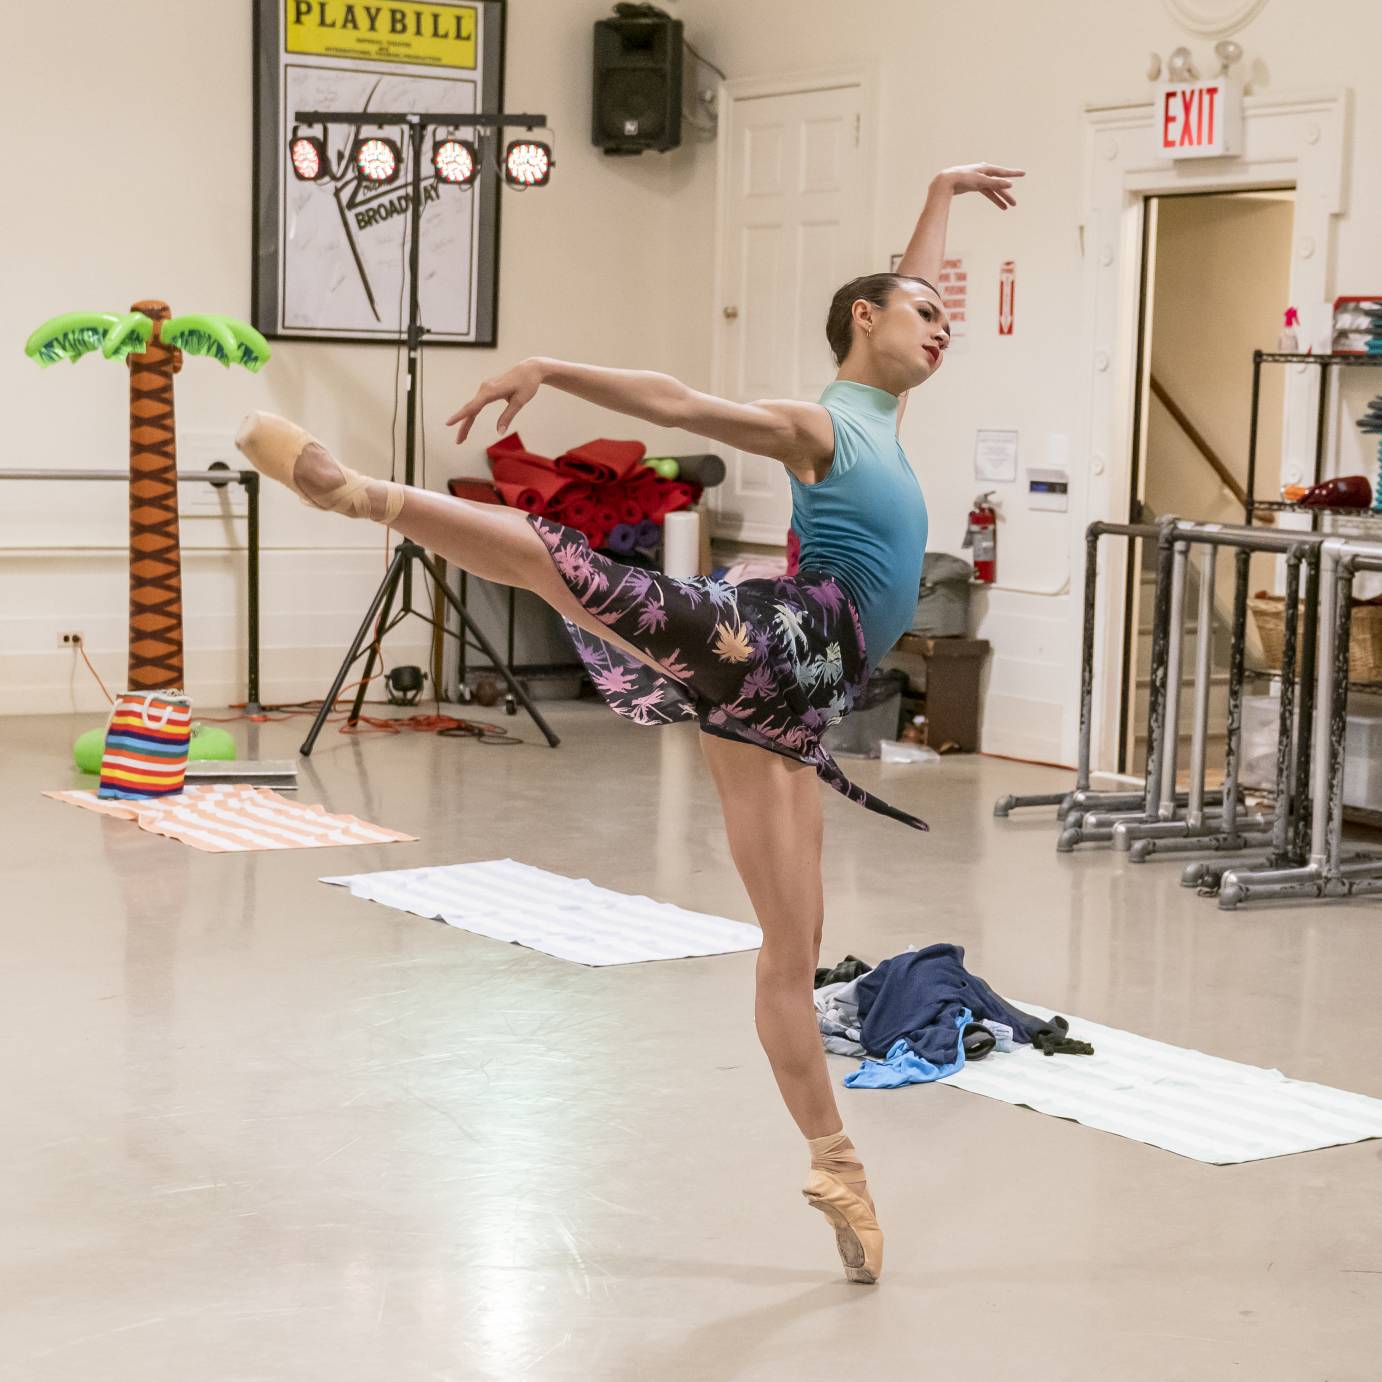 In a teal leotard and floral ballet skirt, a woman executes a lush arabesque